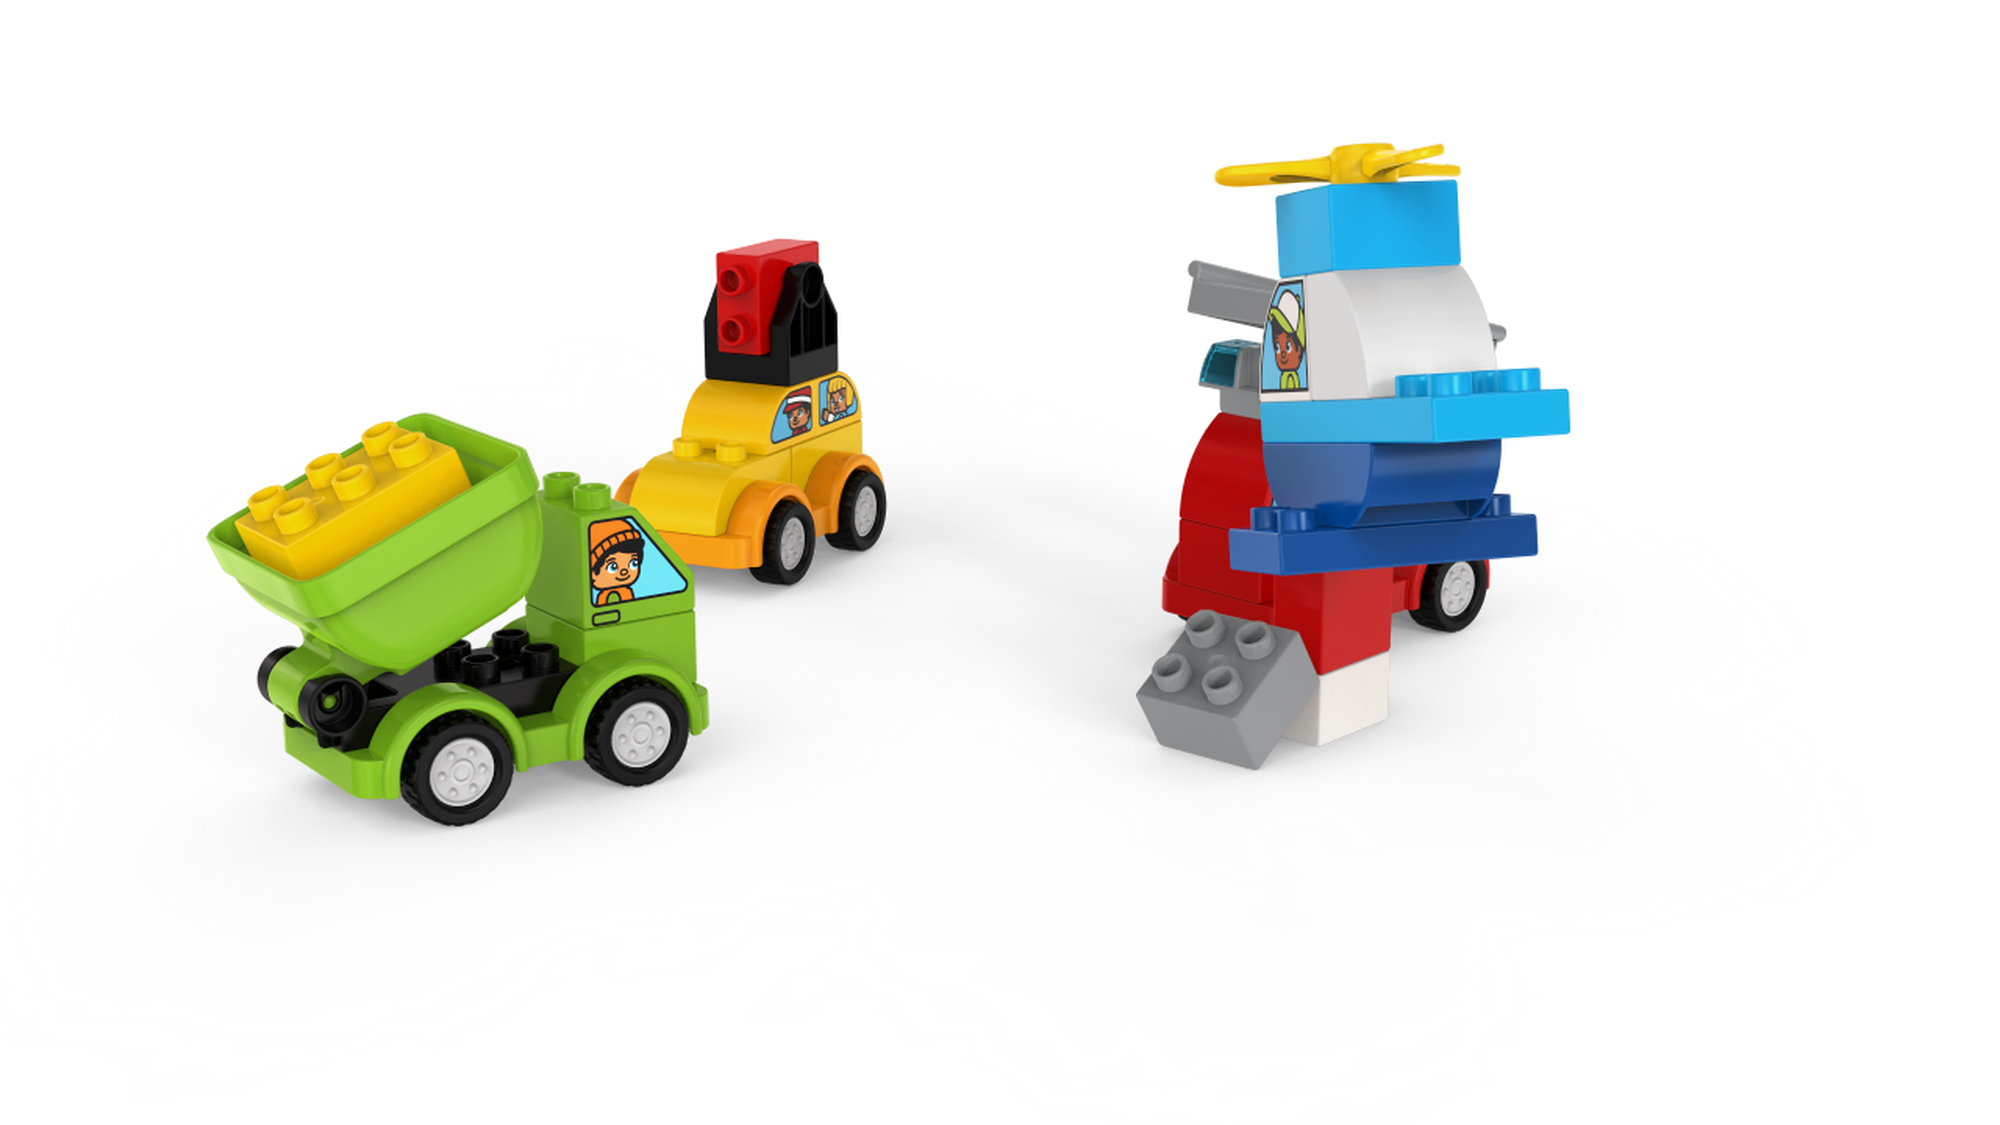 Lego Duplo My First Car Creations Multicolor